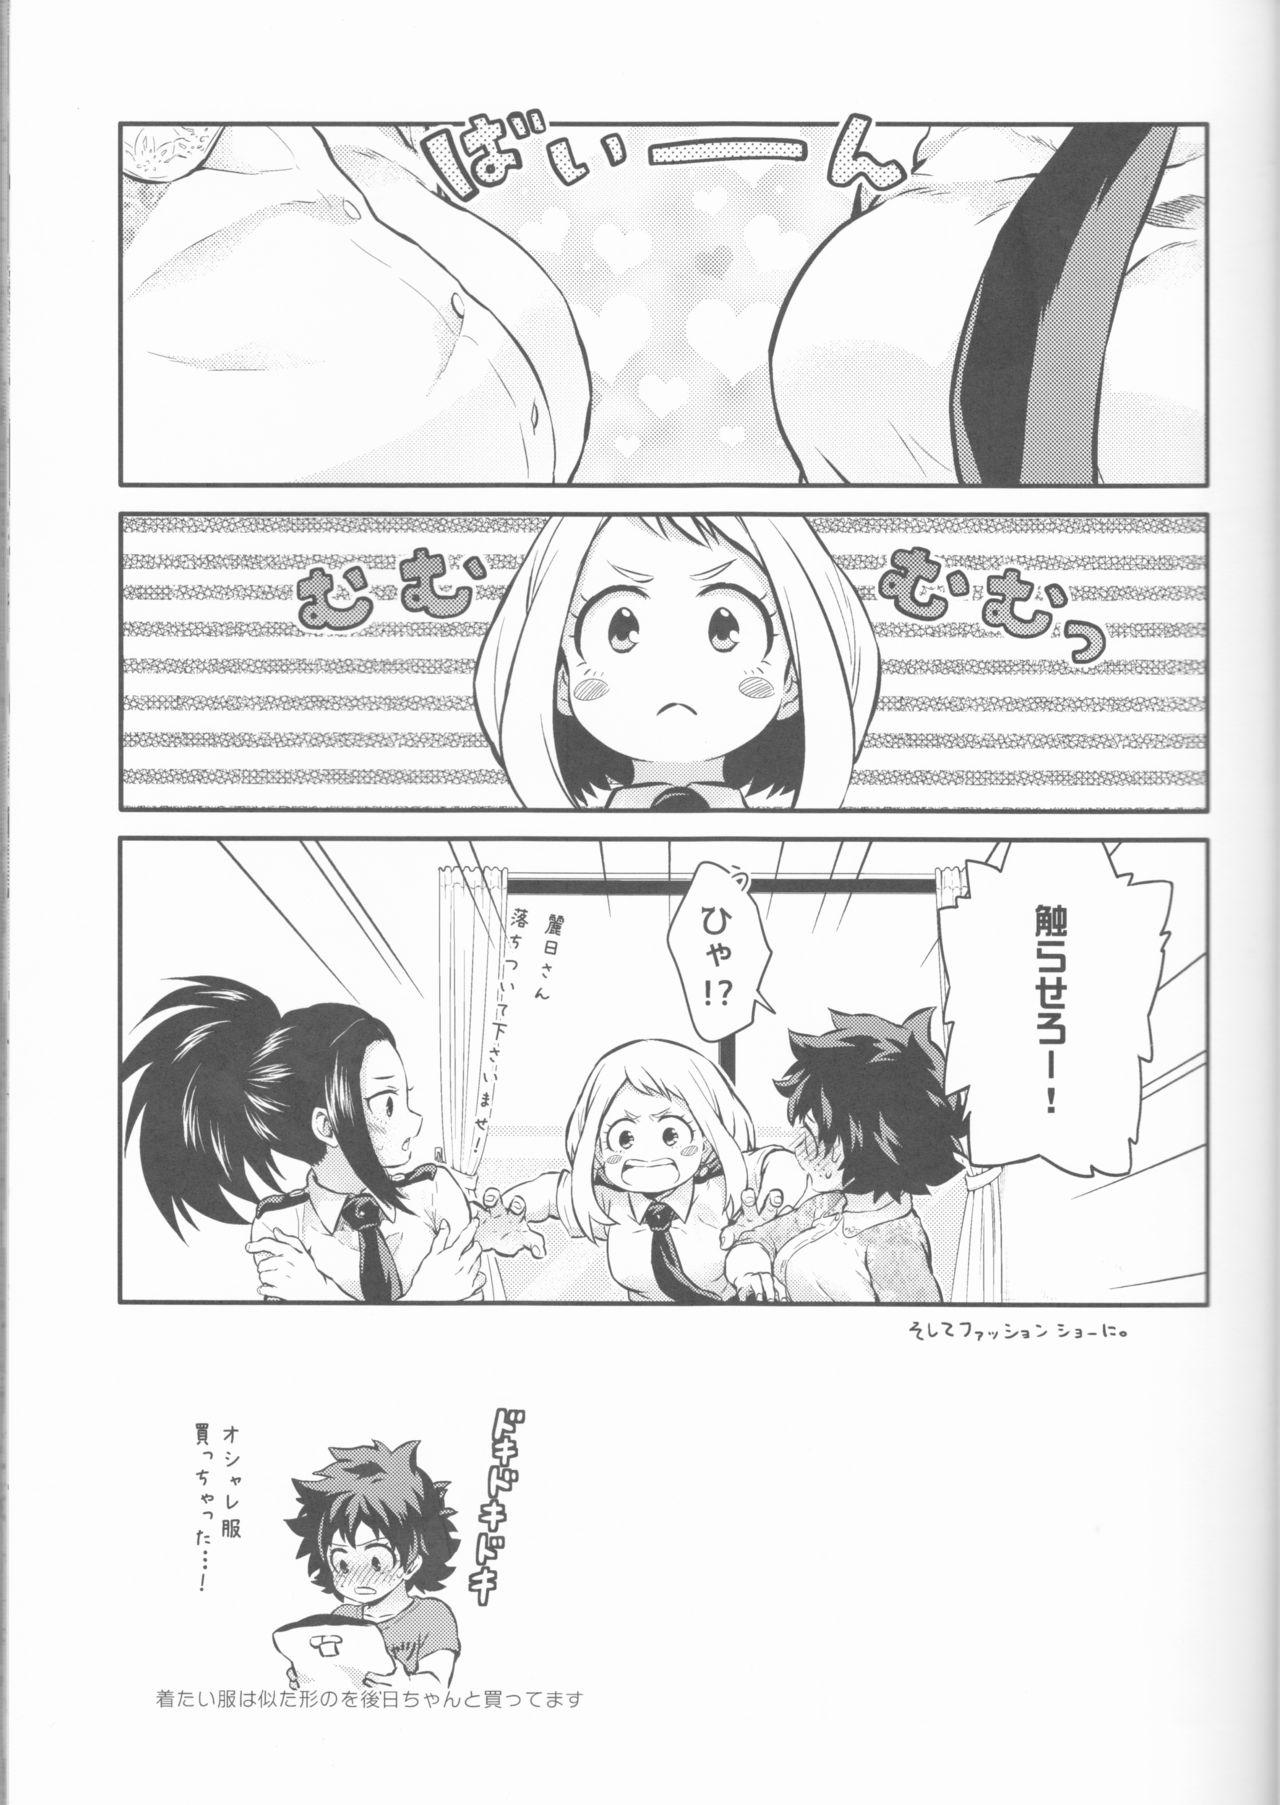 Argentina Love Me Tender another story - My hero academia Adolescente - Page 7